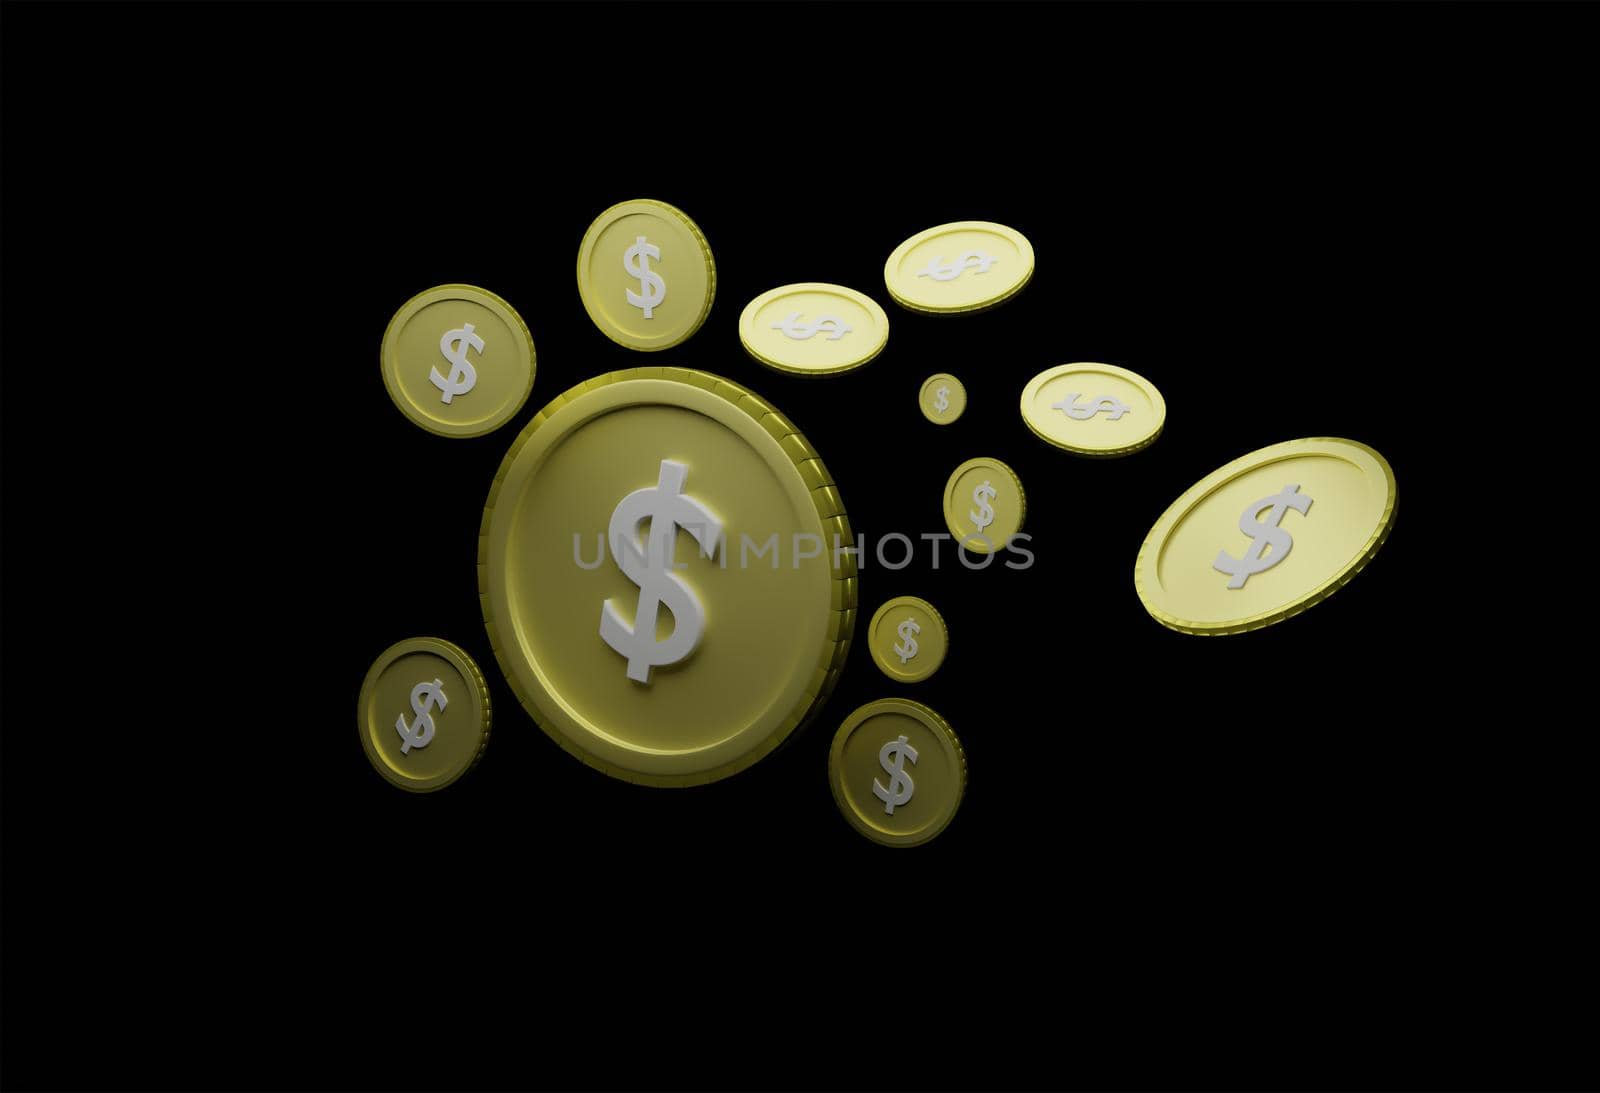 Abstract floating us dollar coin Black background isolated
Concept of currency analysis from economic fluctuations in export trade, global market valuation 3D rendering.